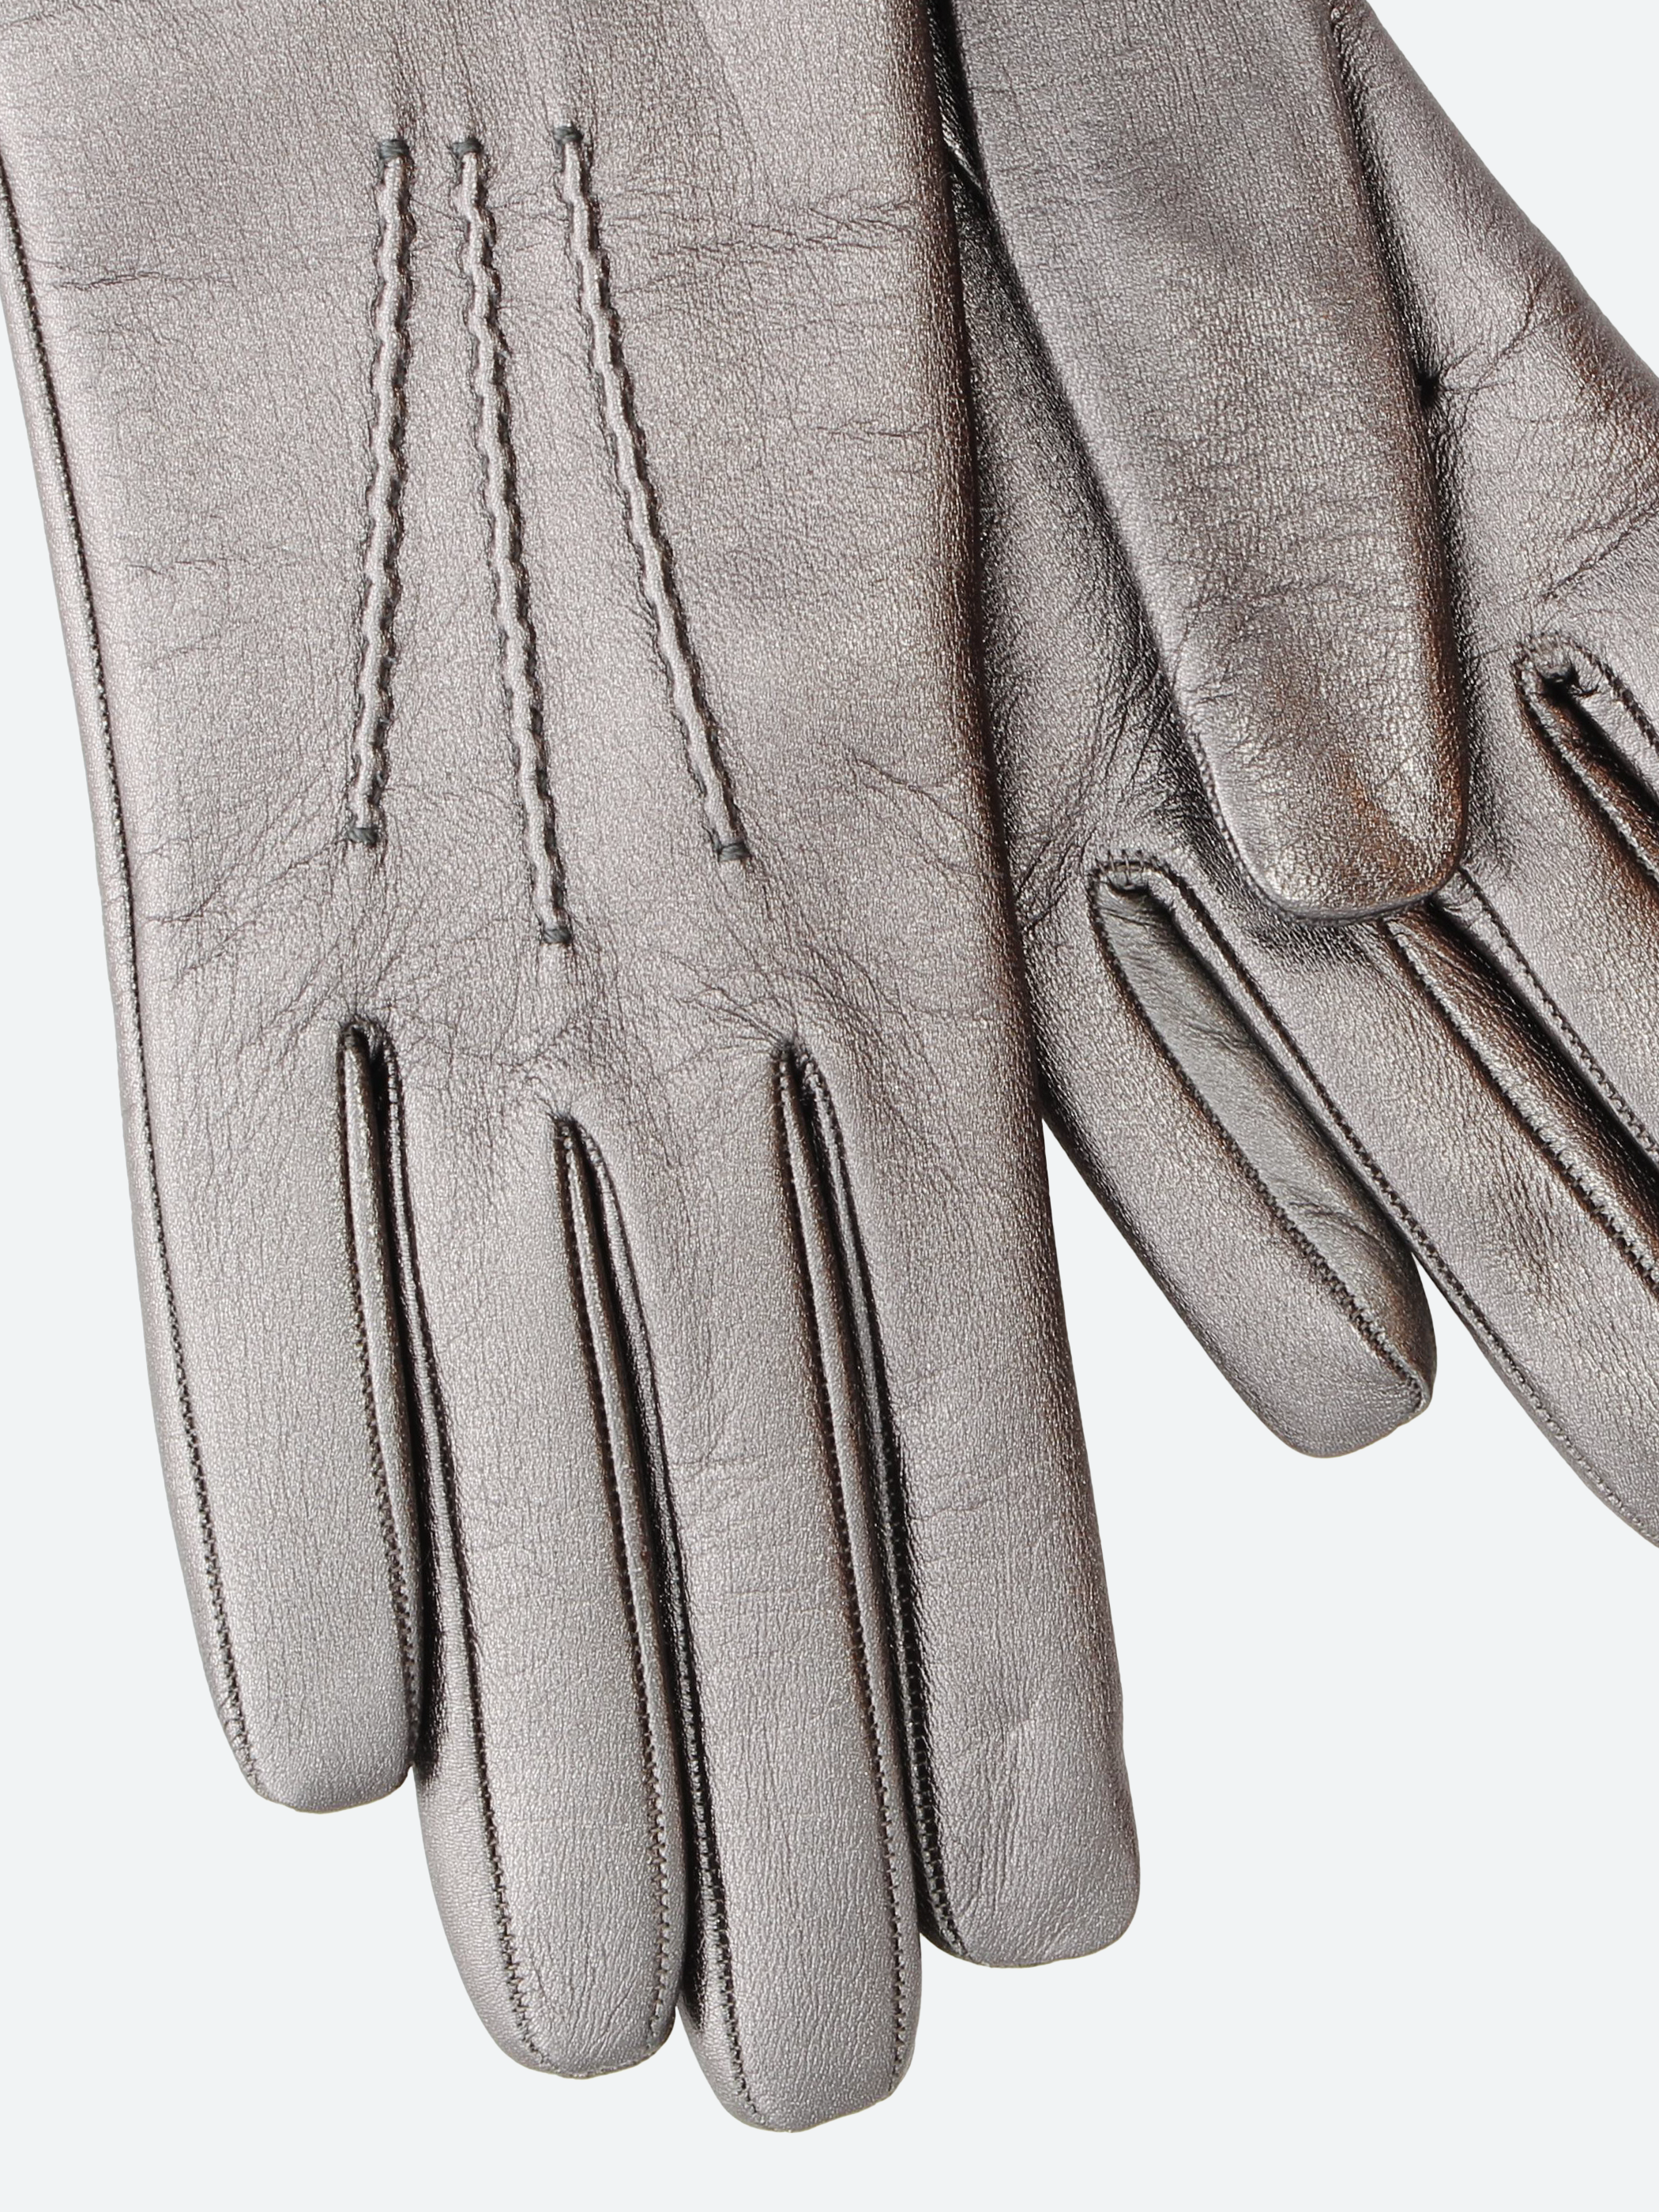 4220 Glove Cashmere Lined